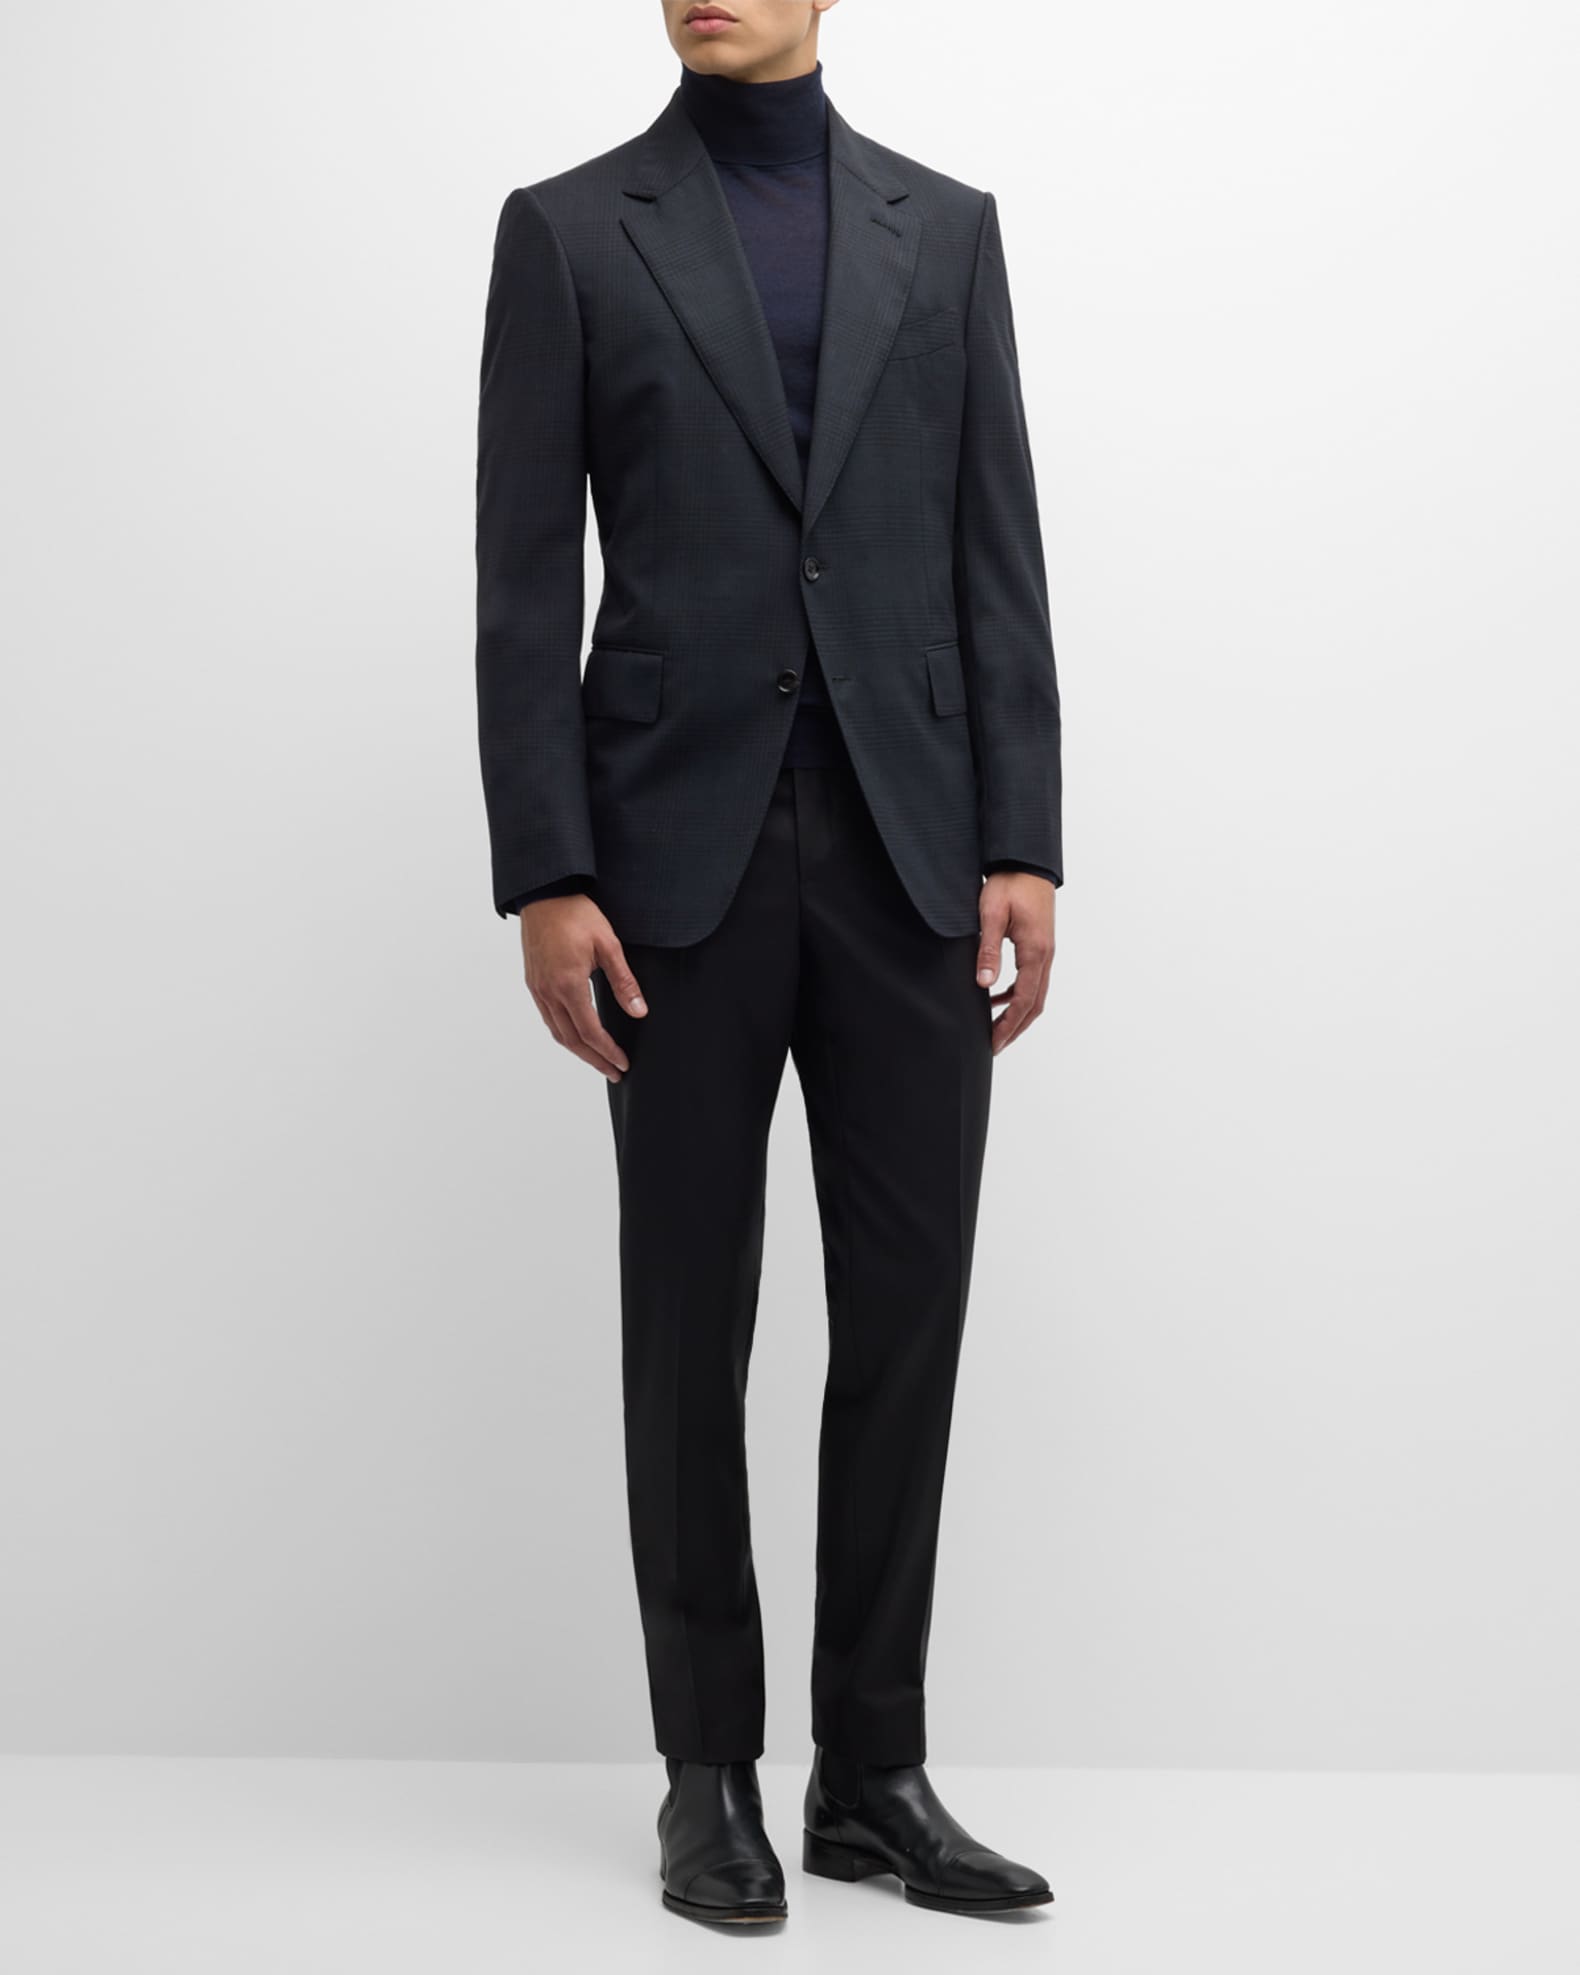 TOM FORD Men's Shelton Prince of Wales Sport Jacket | Neiman Marcus